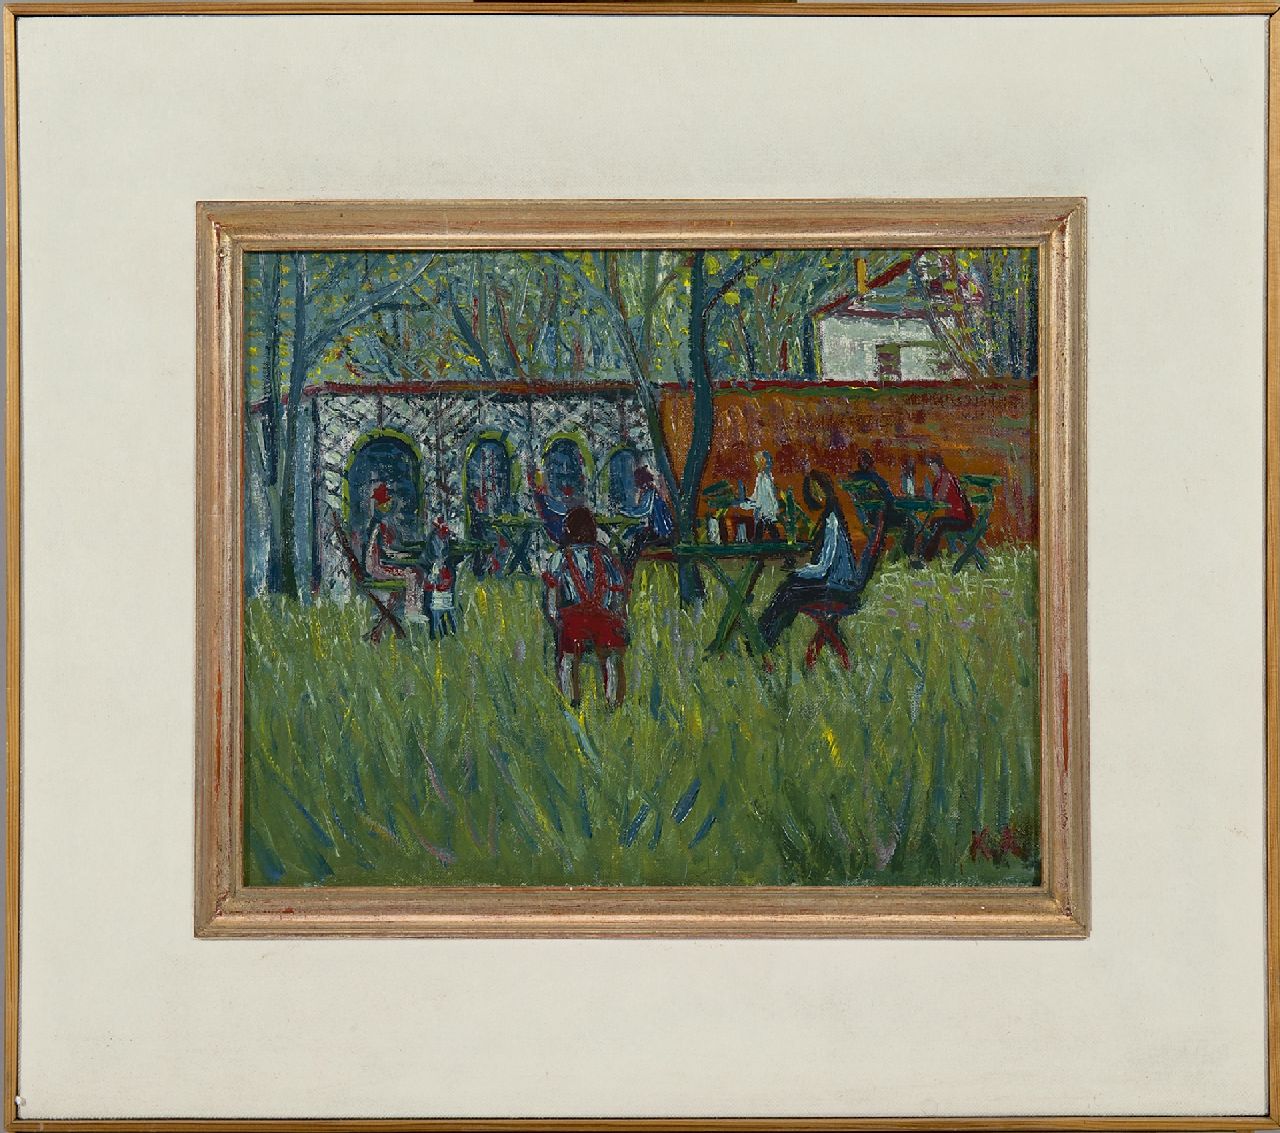 Andréa C.  | Cornelis 'Kees' Andréa, Terrace in a park, oil on canvas 23.0 x 29.0 cm, signed l.r. with initials and in full on the reverse